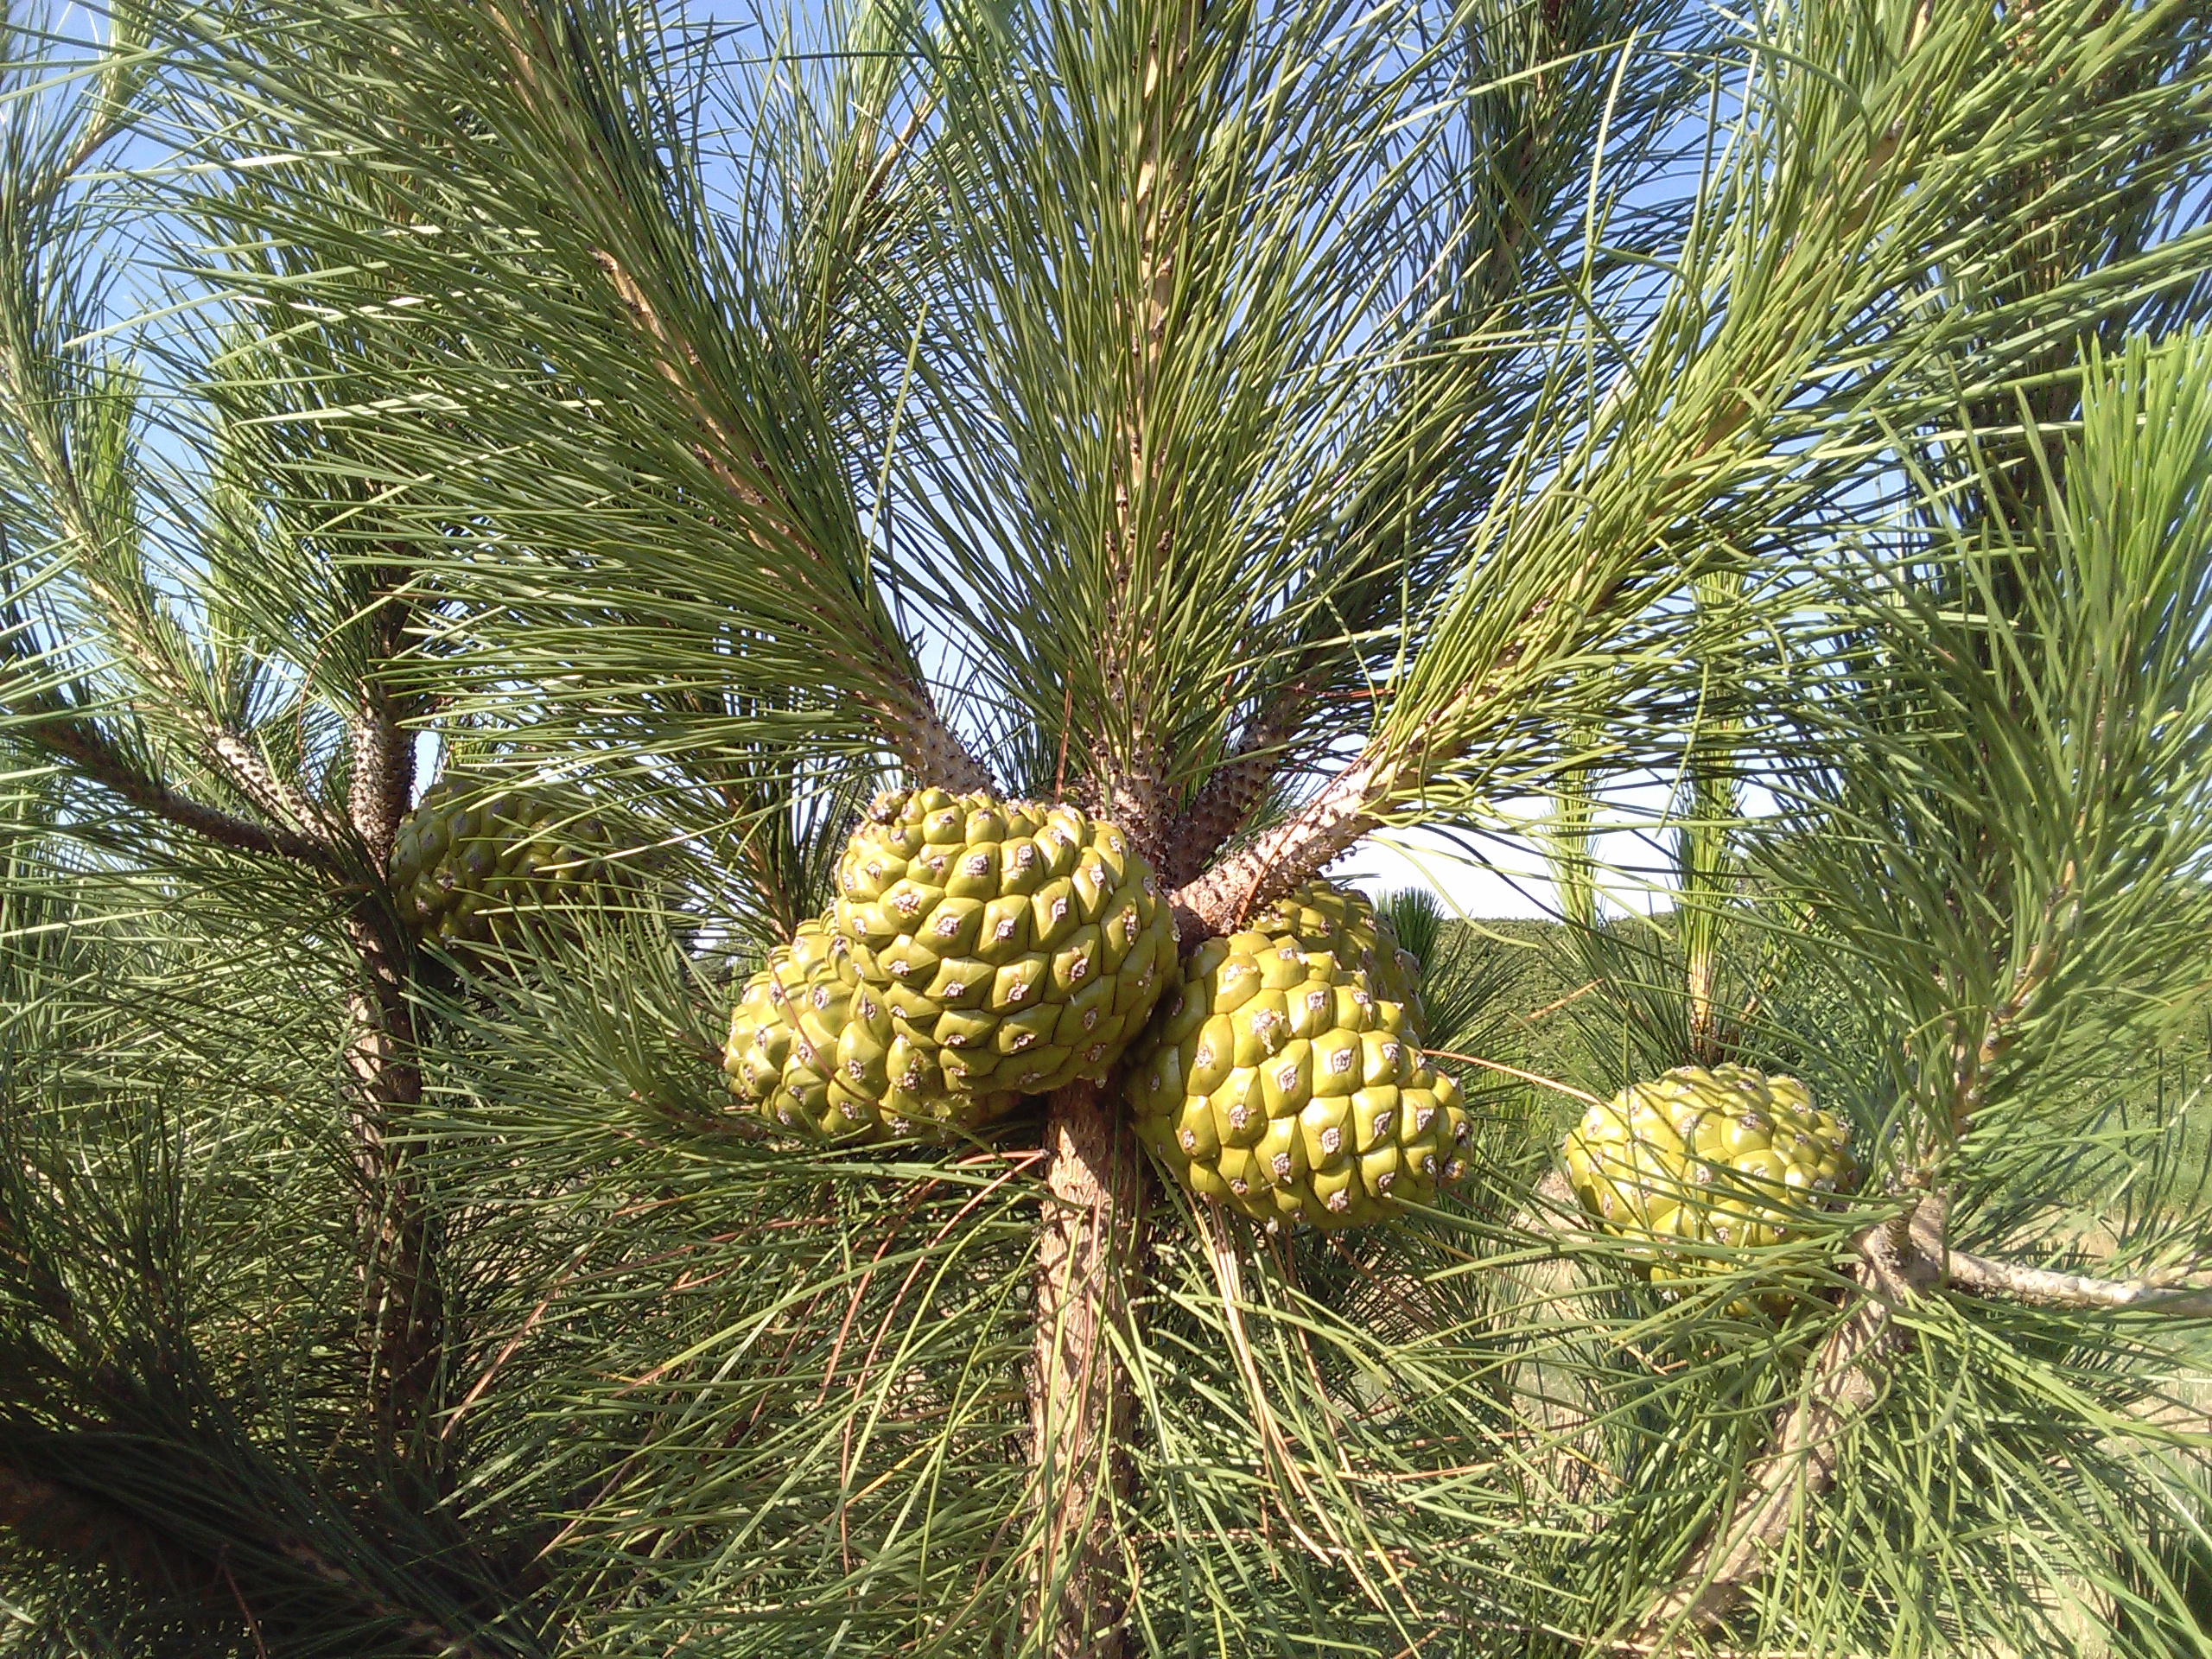 Mediterranean pine nuts can be collected in forest ecosystems or grafted orchards 